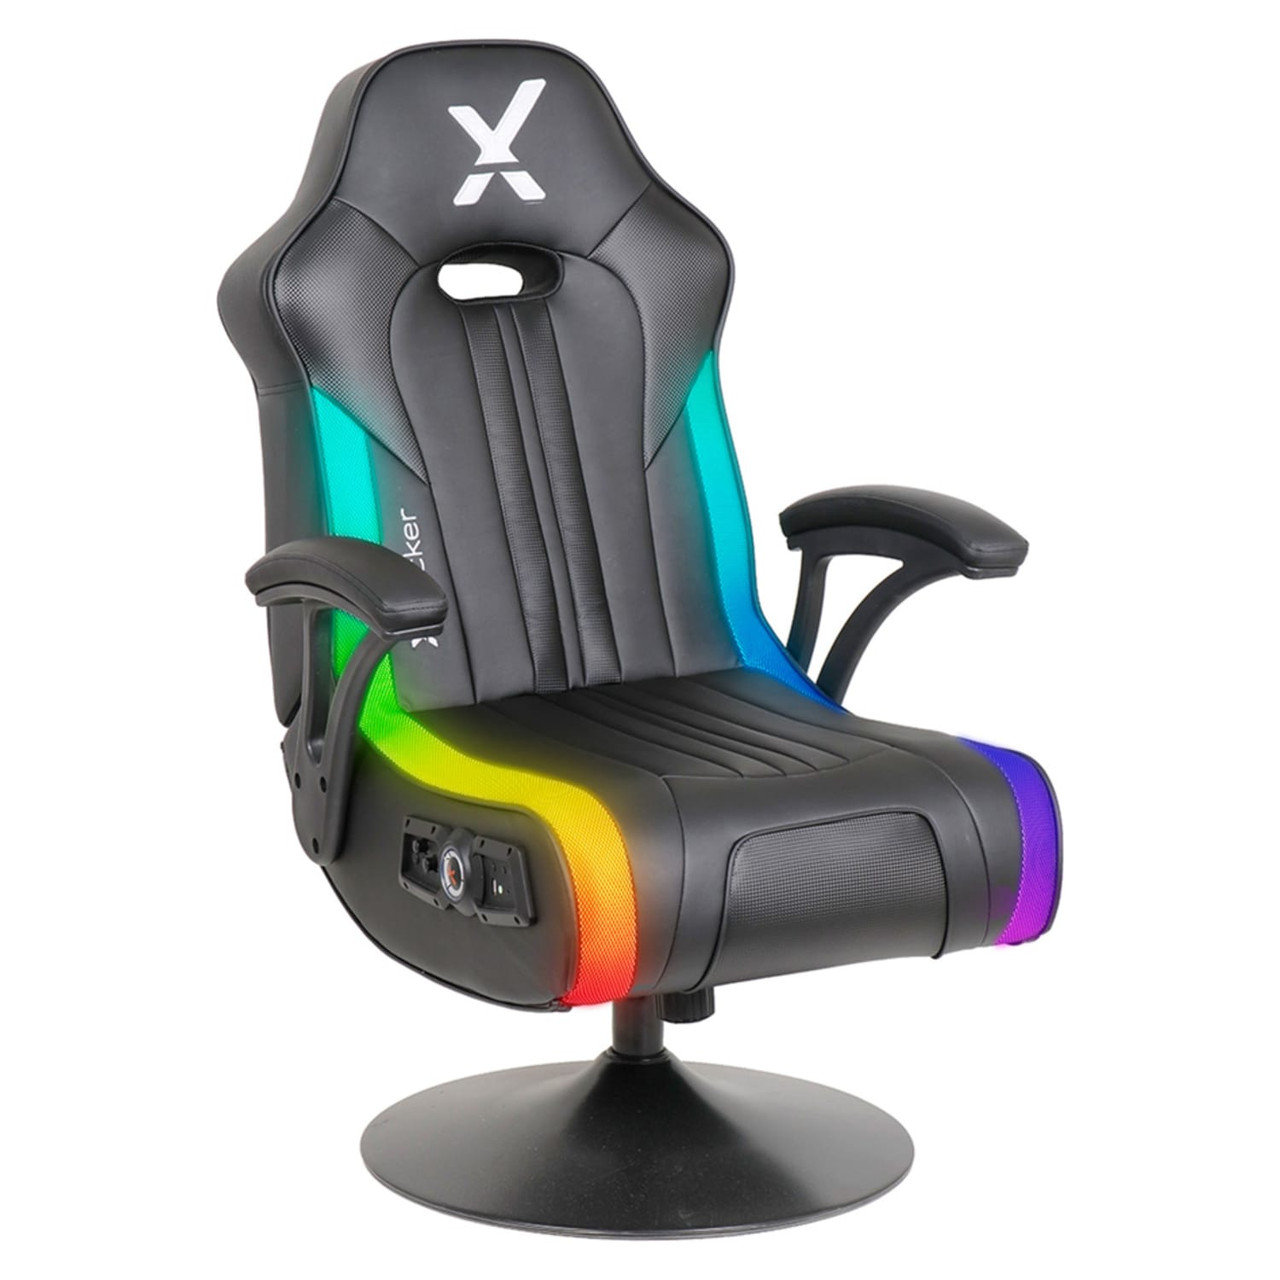 Torque RGB Bluetooth Wireless Audio Pedestal Gaming Chair with Subwoofer and Vibration, Neo Motion, Black/RGB